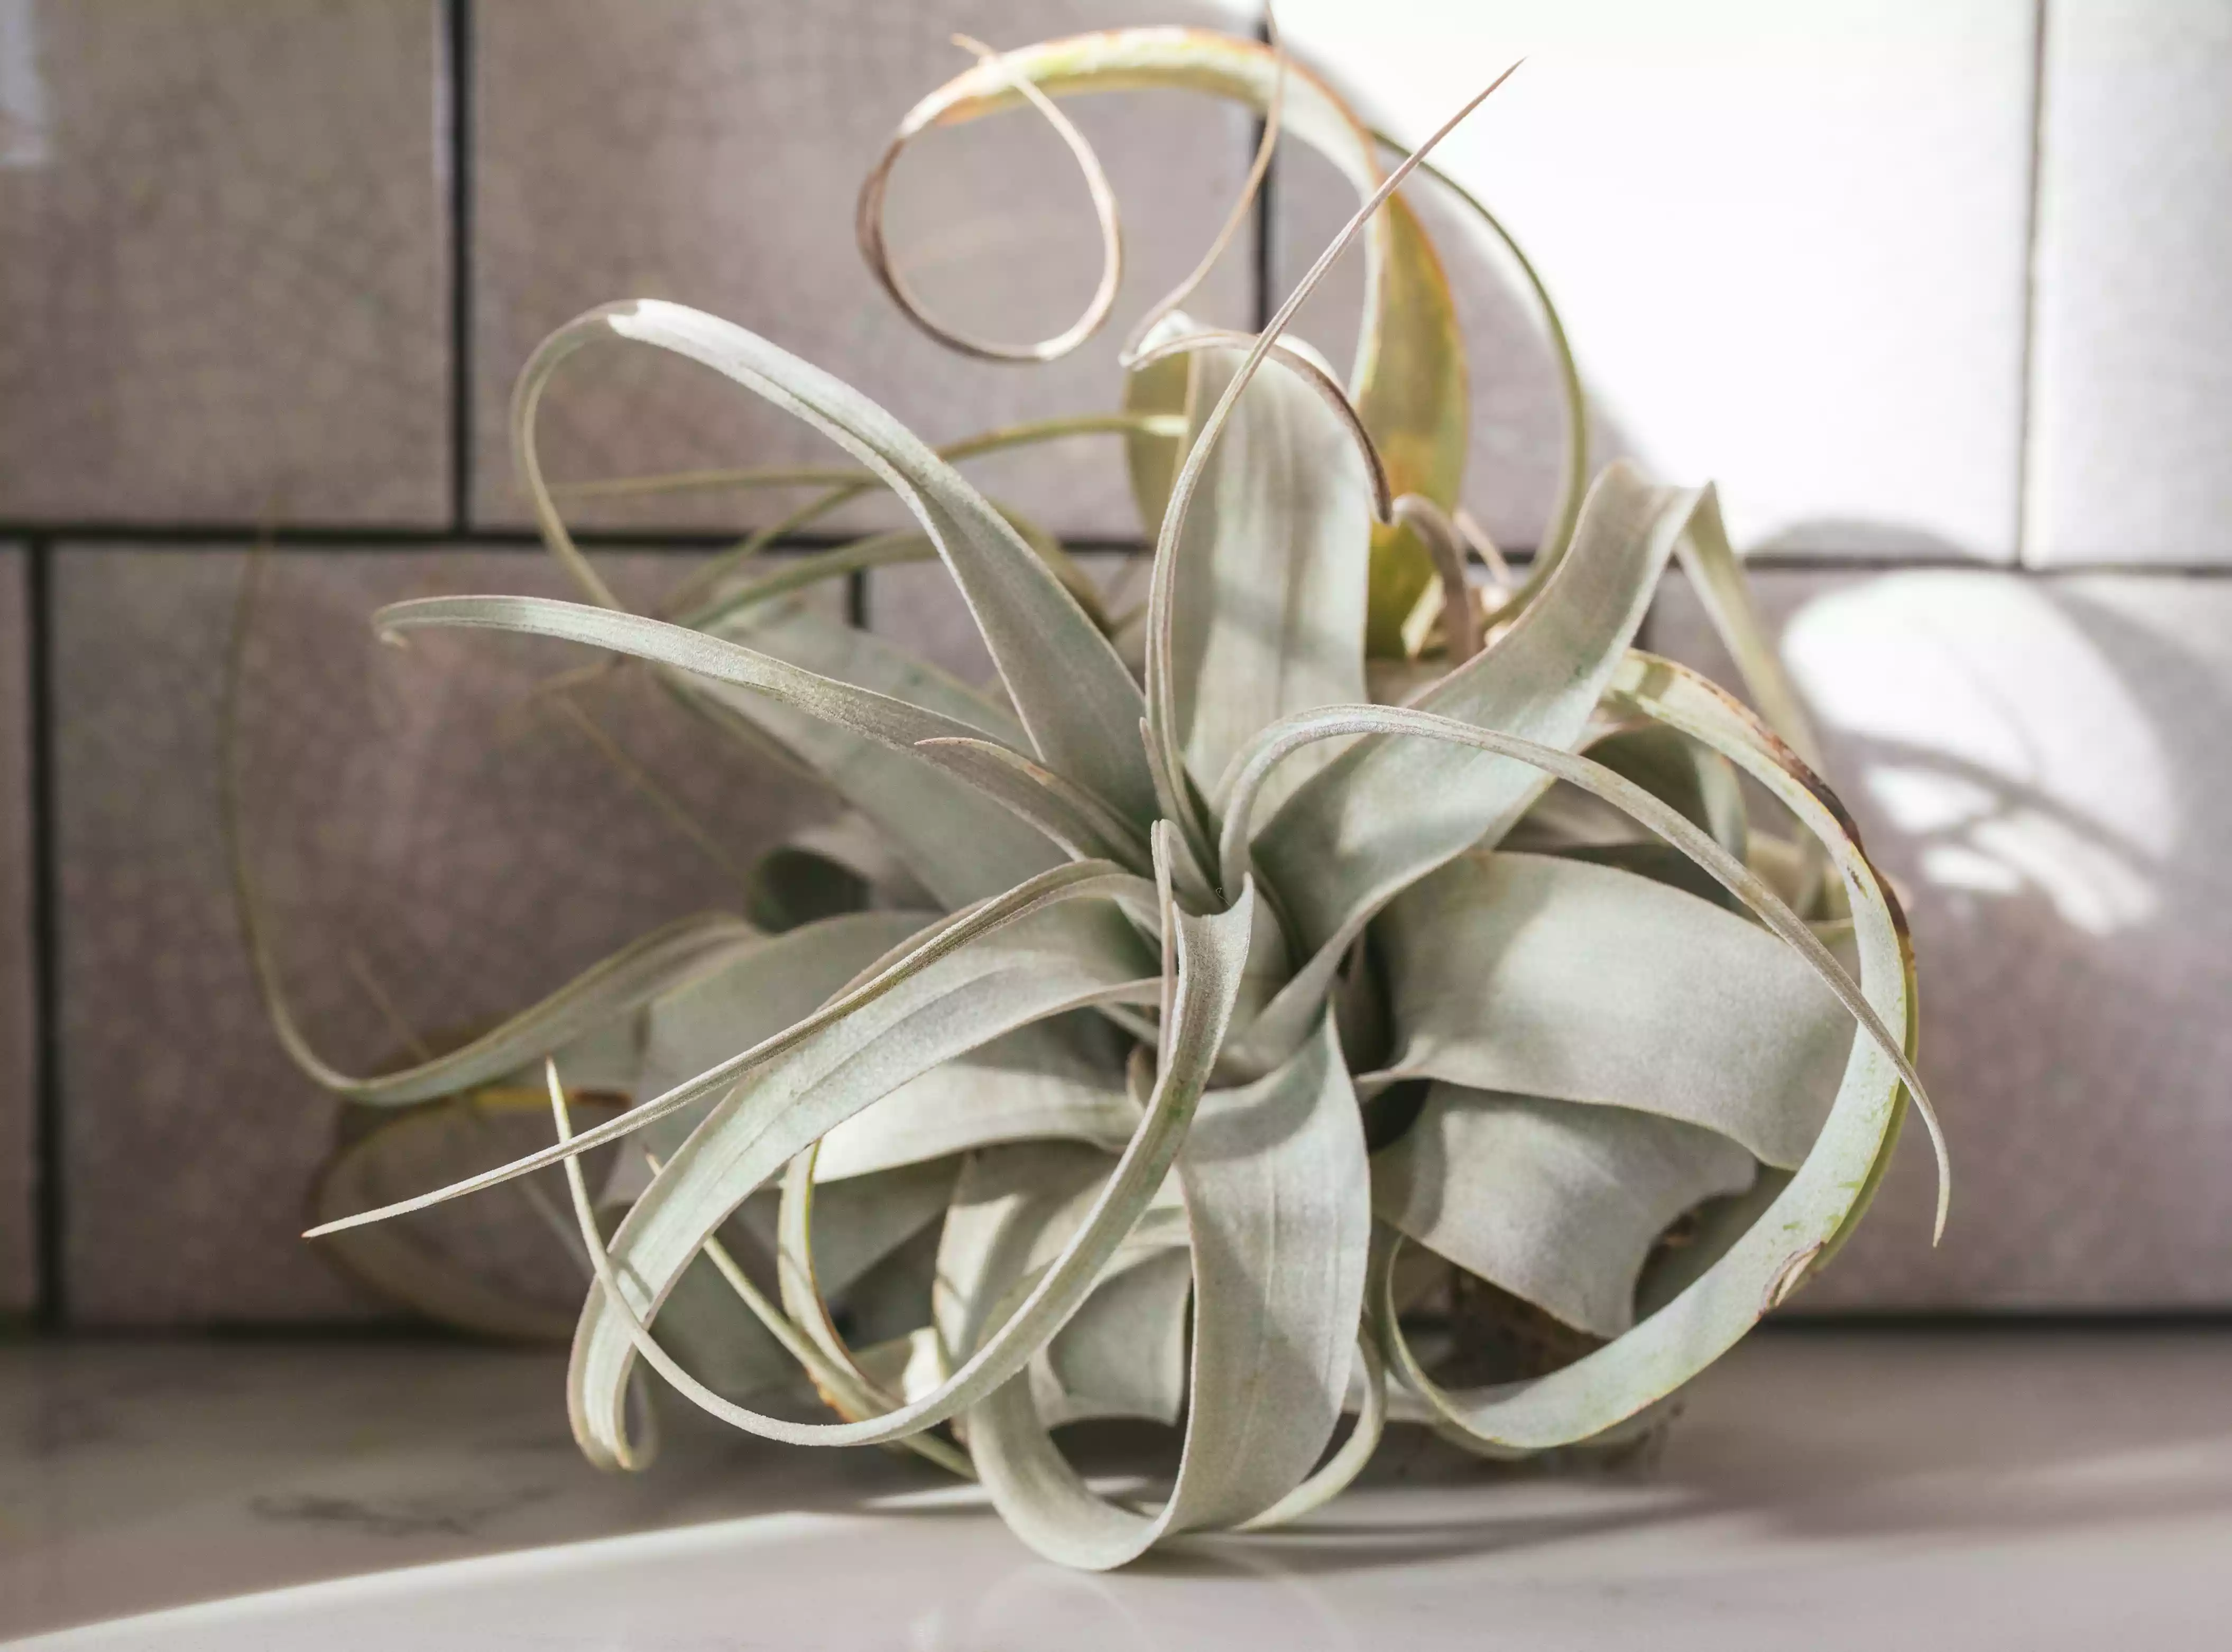 gray-green spiral air plant against grey tile wall